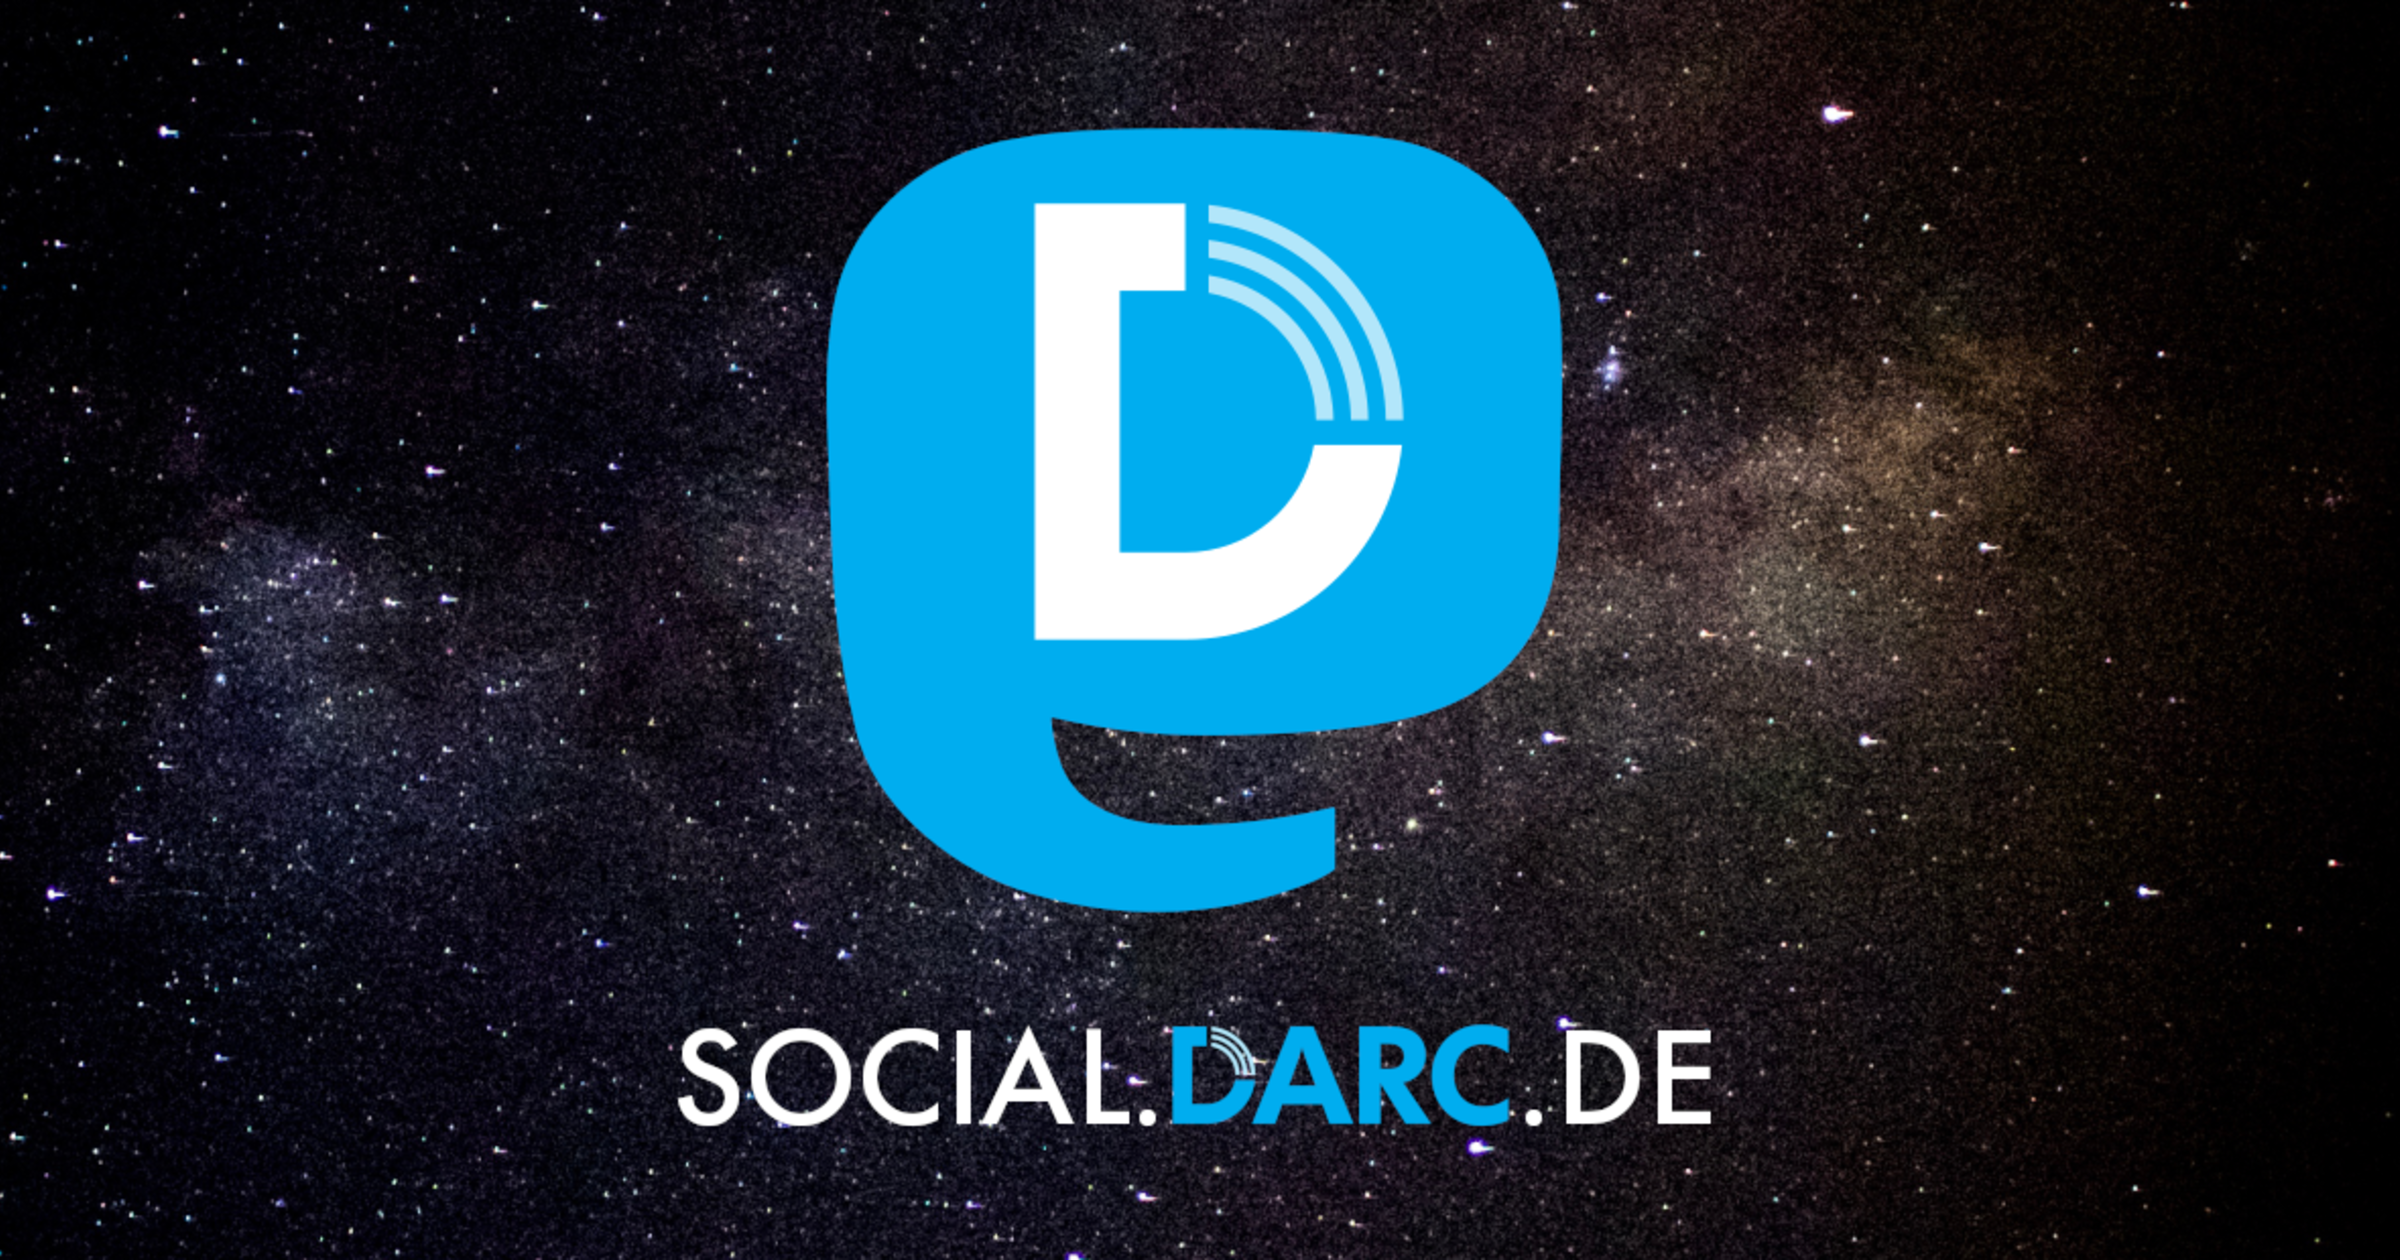 Mastodon style icon with the DARC logo on it overlaid on a starfield with SOCIAL DARC DE underneath